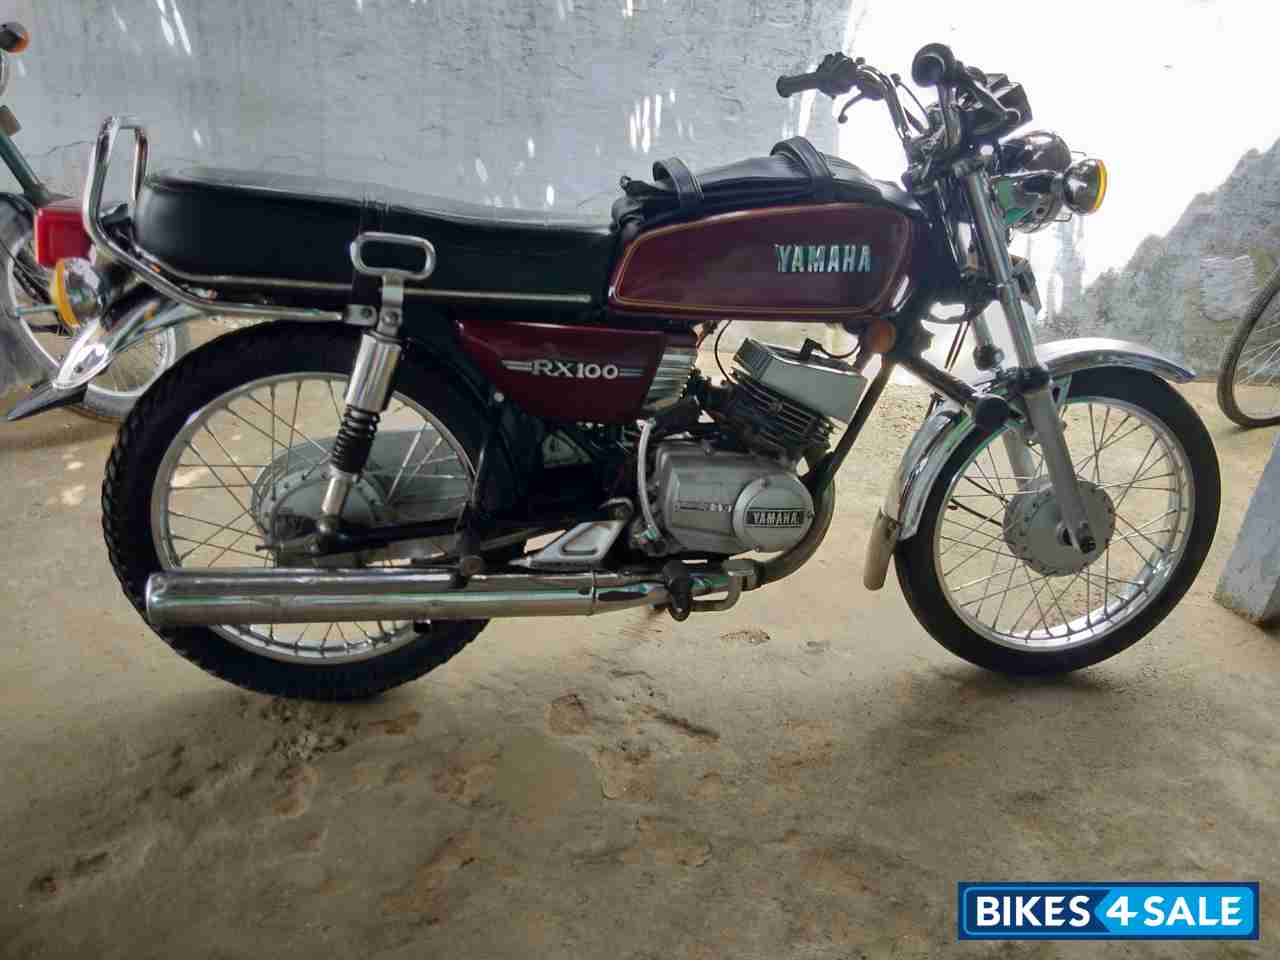 Used 1990 Model Yamaha Rx 100 For Sale In Coimbatore Id 201250 Bikes4sale